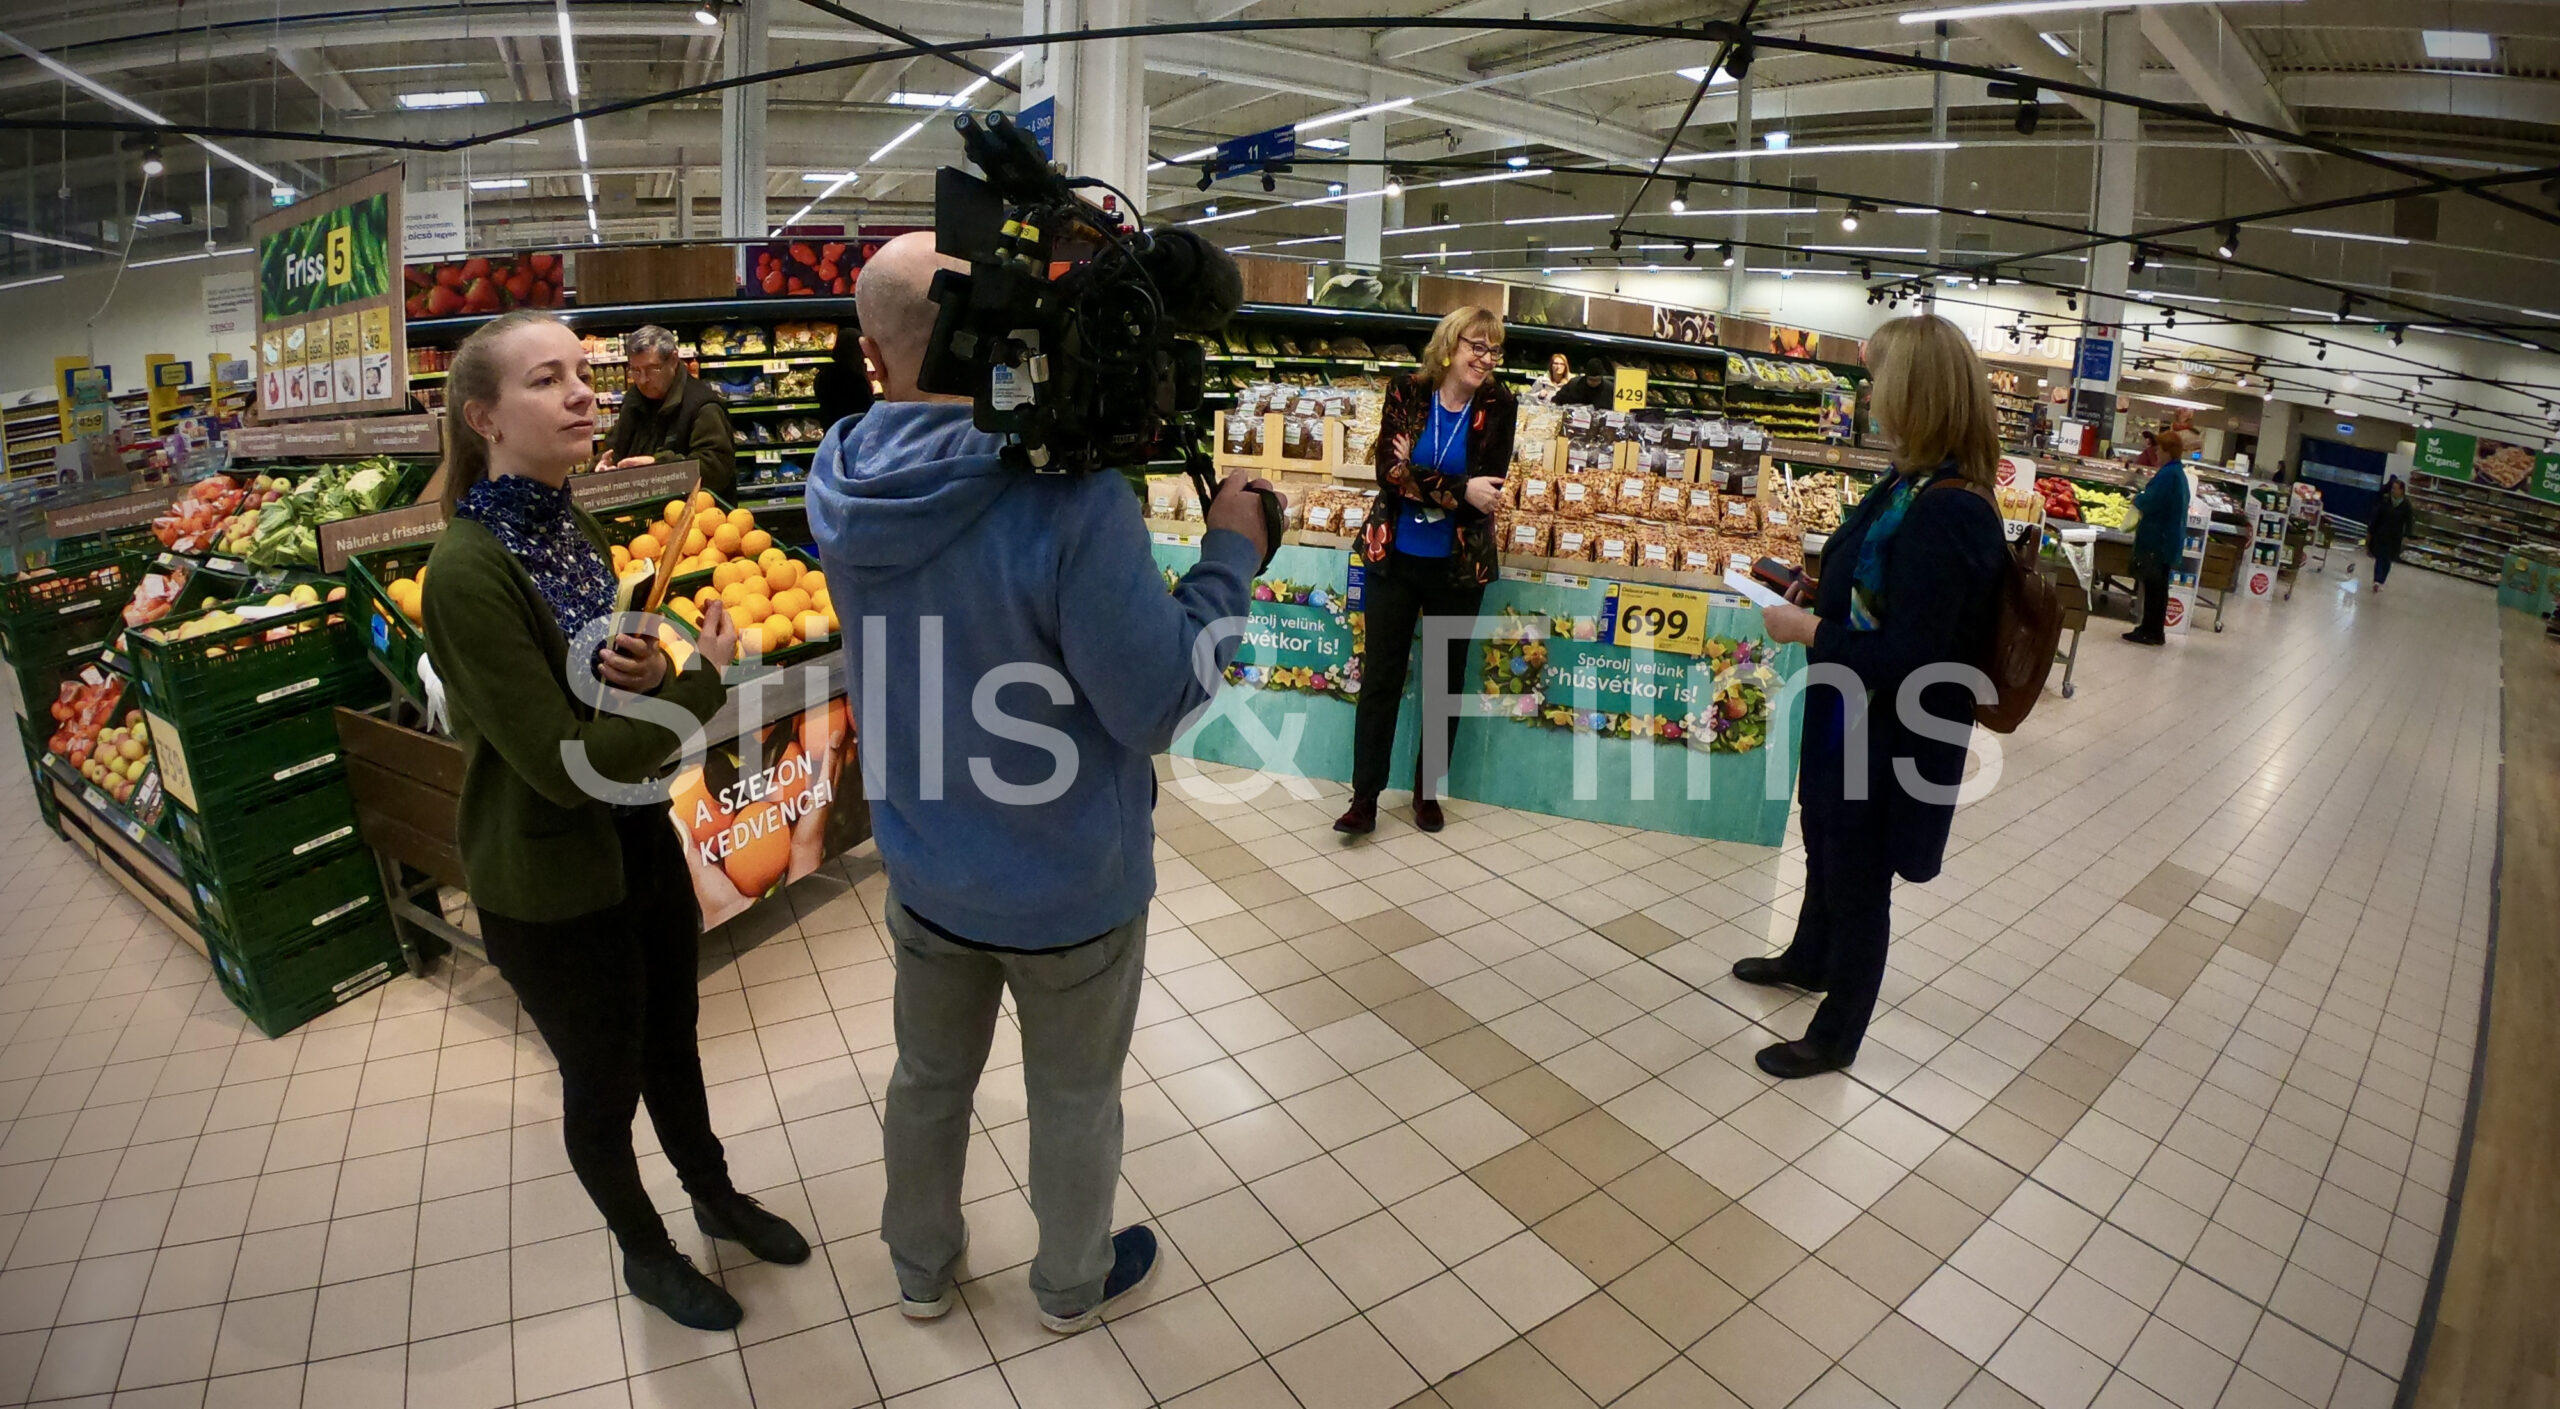 We were filming at TESCO in Budapest, Hungary